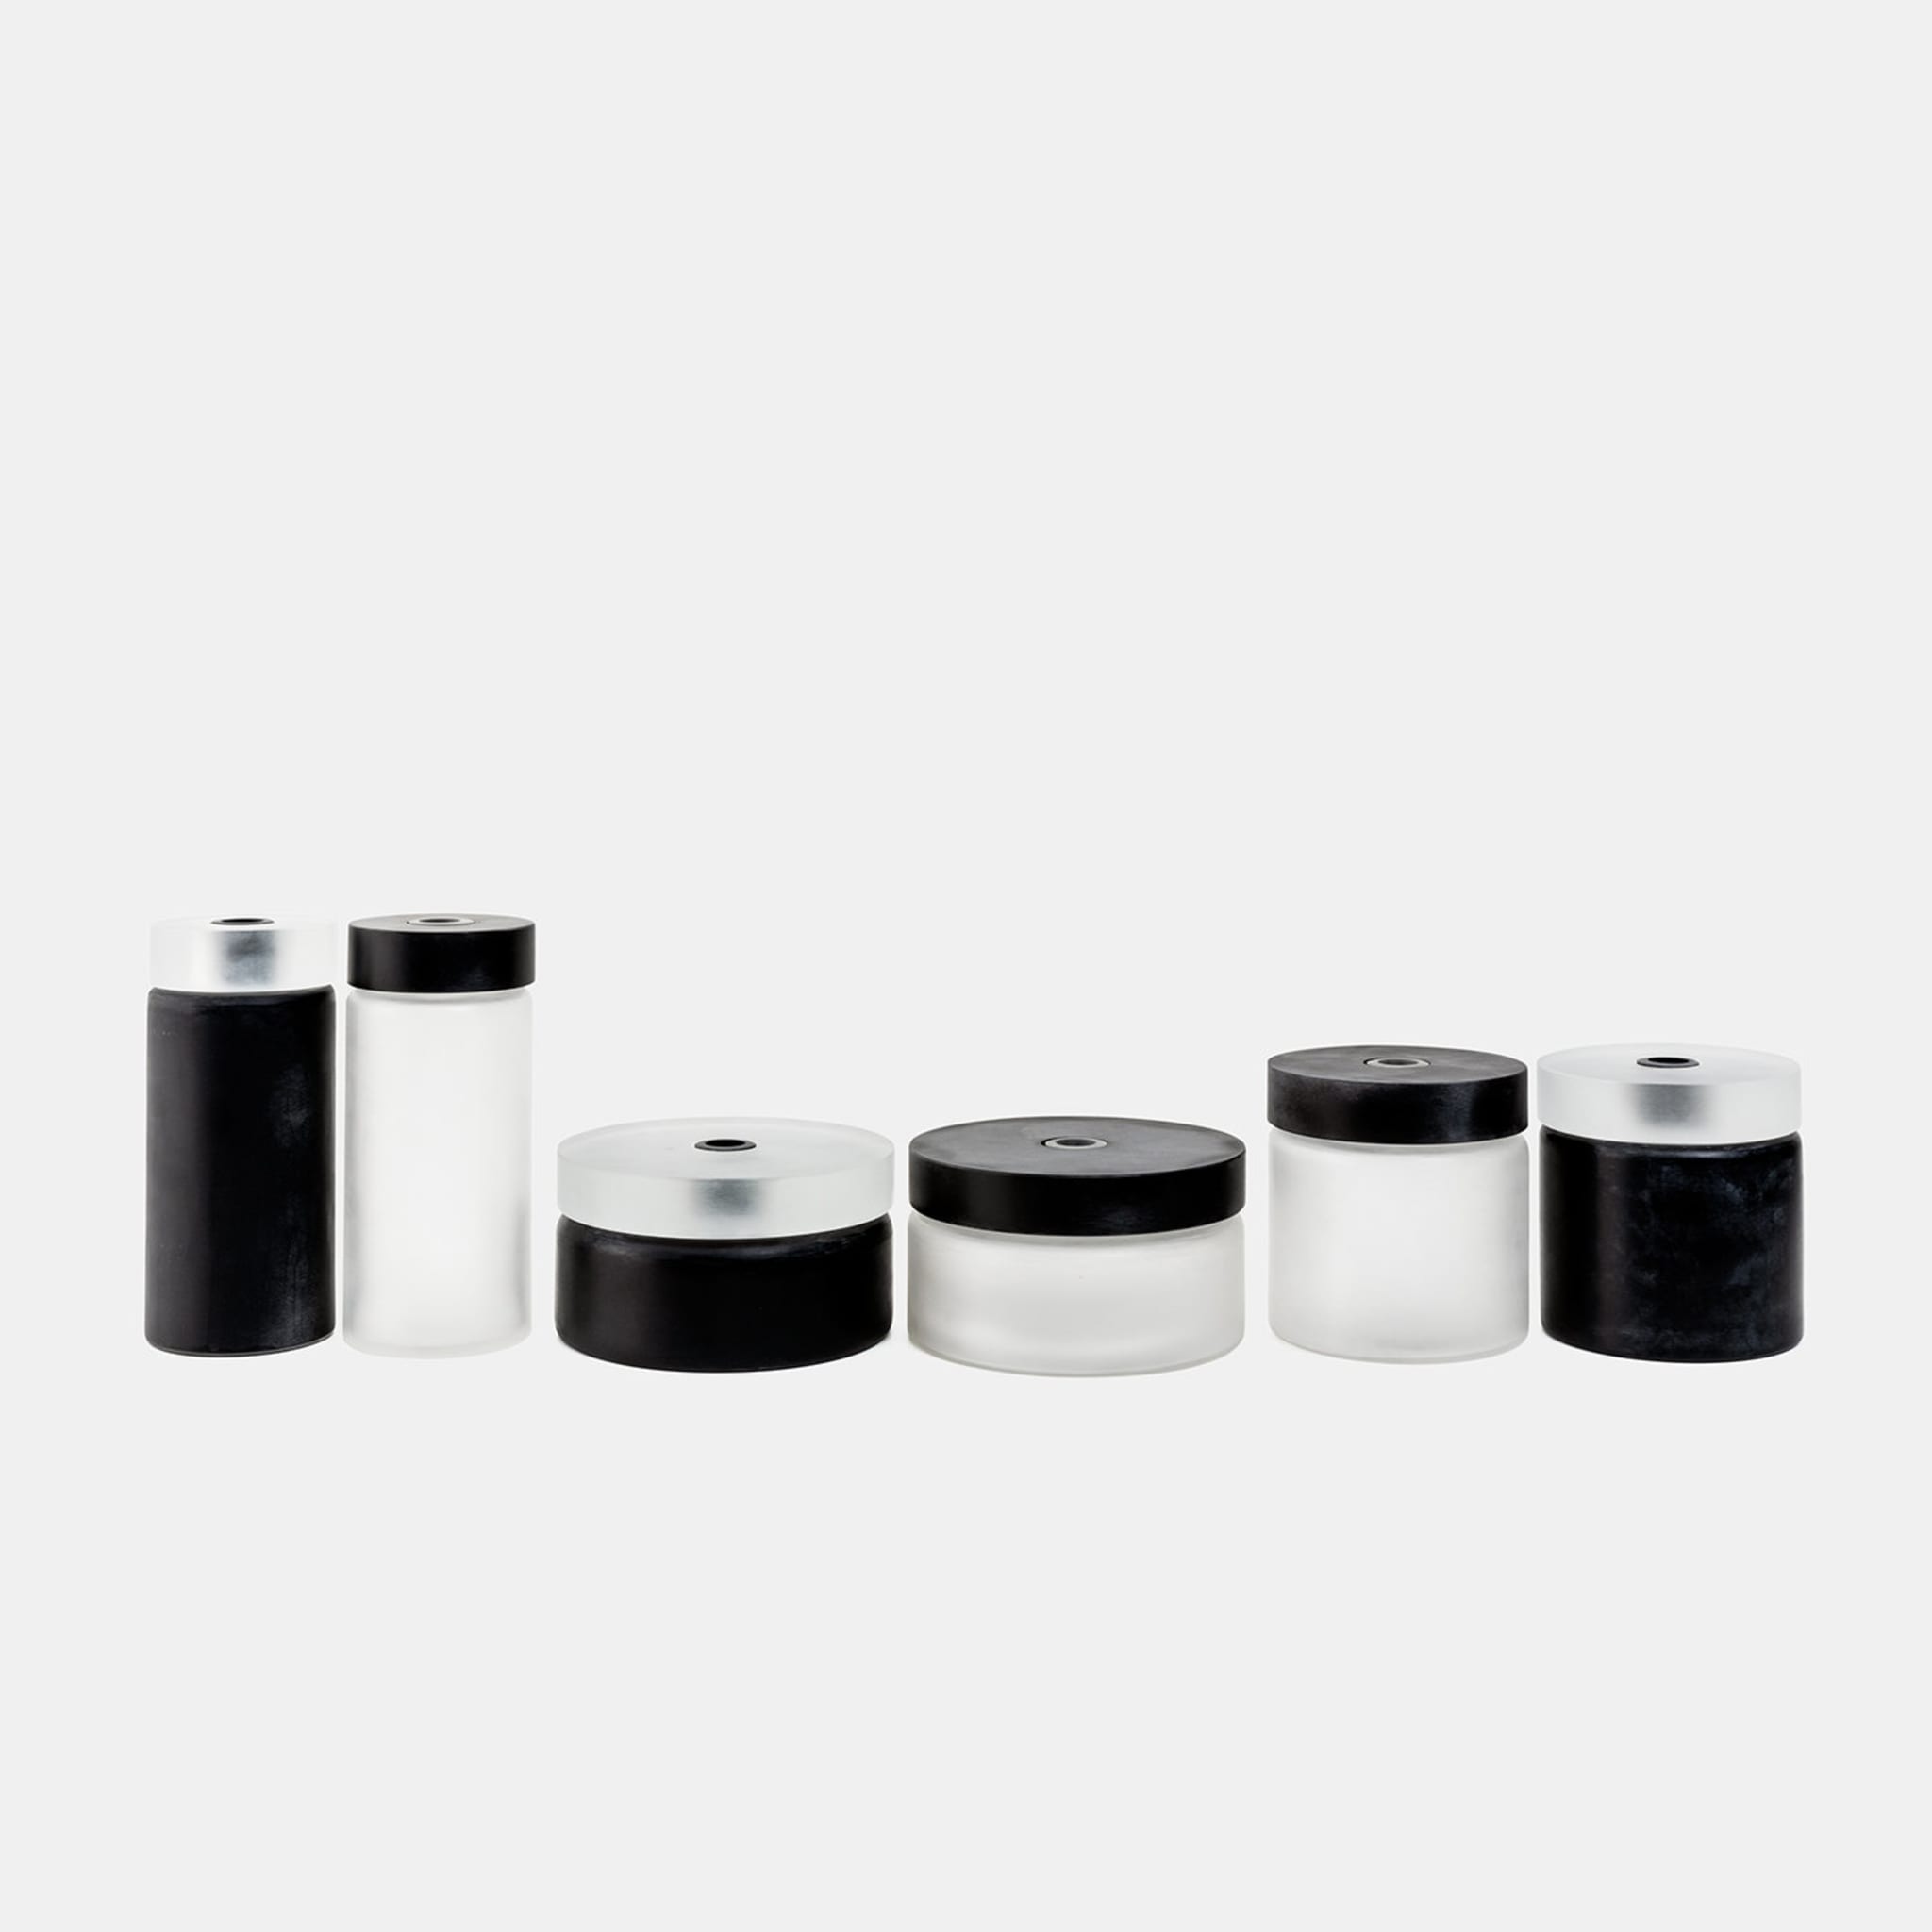 The Short Cylinder Glass Vase in Black and White - Alternative view 2